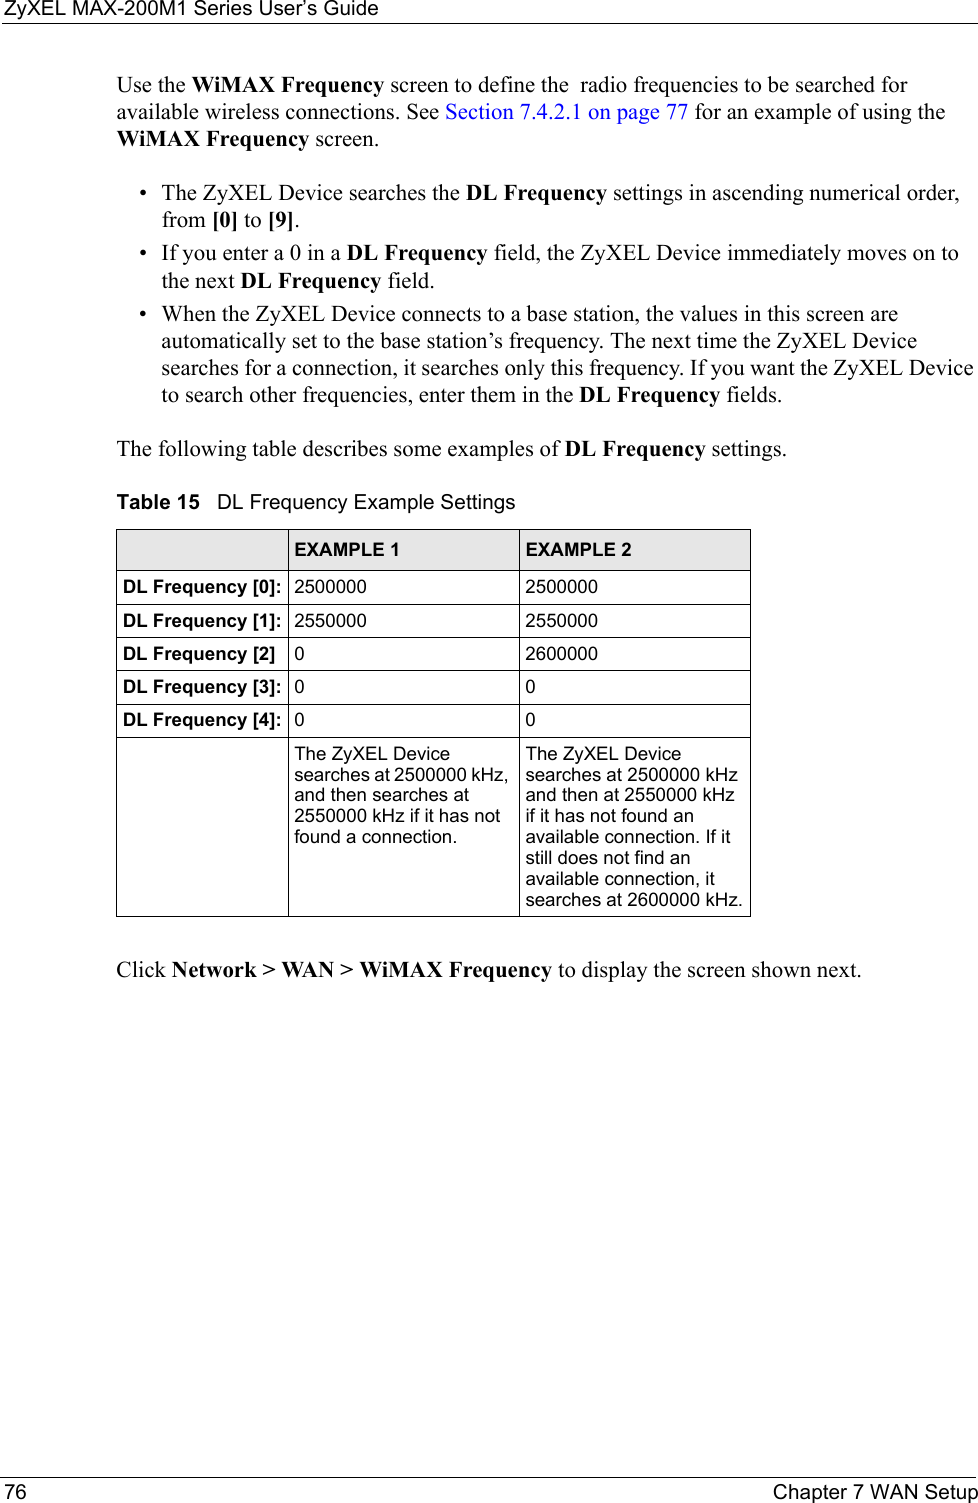 ZyXEL MAX-200M1 Series User’s Guide76 Chapter 7 WAN SetupUse the WiMAX Frequency screen to define the  radio frequencies to be searched for available wireless connections. See Section 7.4.2.1 on page 77 for an example of using the WiMAX Frequency screen.• The ZyXEL Device searches the DL Frequency settings in ascending numerical order, from [0] to [9].• If you enter a 0 in a DL Frequency field, the ZyXEL Device immediately moves on to the next DL Frequency field.• When the ZyXEL Device connects to a base station, the values in this screen are automatically set to the base station’s frequency. The next time the ZyXEL Device searches for a connection, it searches only this frequency. If you want the ZyXEL Device to search other frequencies, enter them in the DL Frequency fields.The following table describes some examples of DL Frequency settings.Click Network &gt; WAN &gt; WiMAX Frequency to display the screen shown next.Table 15   DL Frequency Example SettingsEXAMPLE 1 EXAMPLE 2DL Frequency [0]: 2500000 2500000DL Frequency [1]: 2550000 2550000DL Frequency [2] 0 2600000DL Frequency [3]: 00DL Frequency [4]: 00The ZyXEL Device searches at 2500000 kHz, and then searches at 2550000 kHz if it has not found a connection.The ZyXEL Device searches at 2500000 kHz and then at 2550000 kHz if it has not found an available connection. If it still does not find an available connection, it searches at 2600000 kHz.